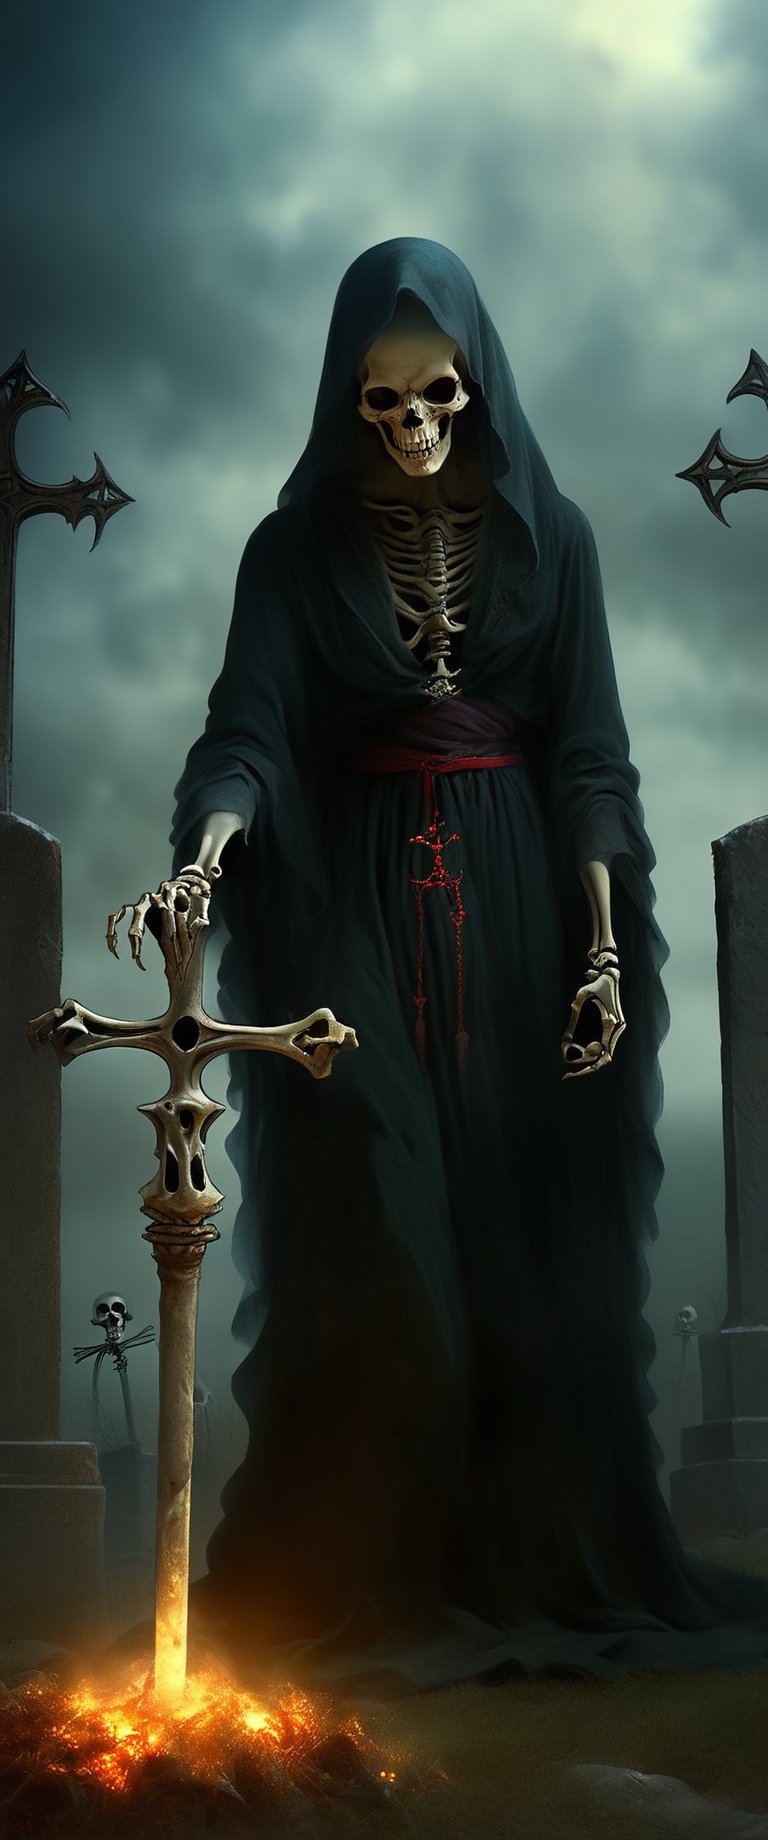 Generate hyper realistic image of a necromancer performing an unholy ritual to raise the dead, surrounded by a graveyard filled with restless spirits. The necromancer's staff should channel dark energies, and skeletal hands should emerge from the ground as the undead awaken. Convey the malevolent power of the necromancer as they defy the natural order to command the deceased.,DonMn1ghtm4reXL